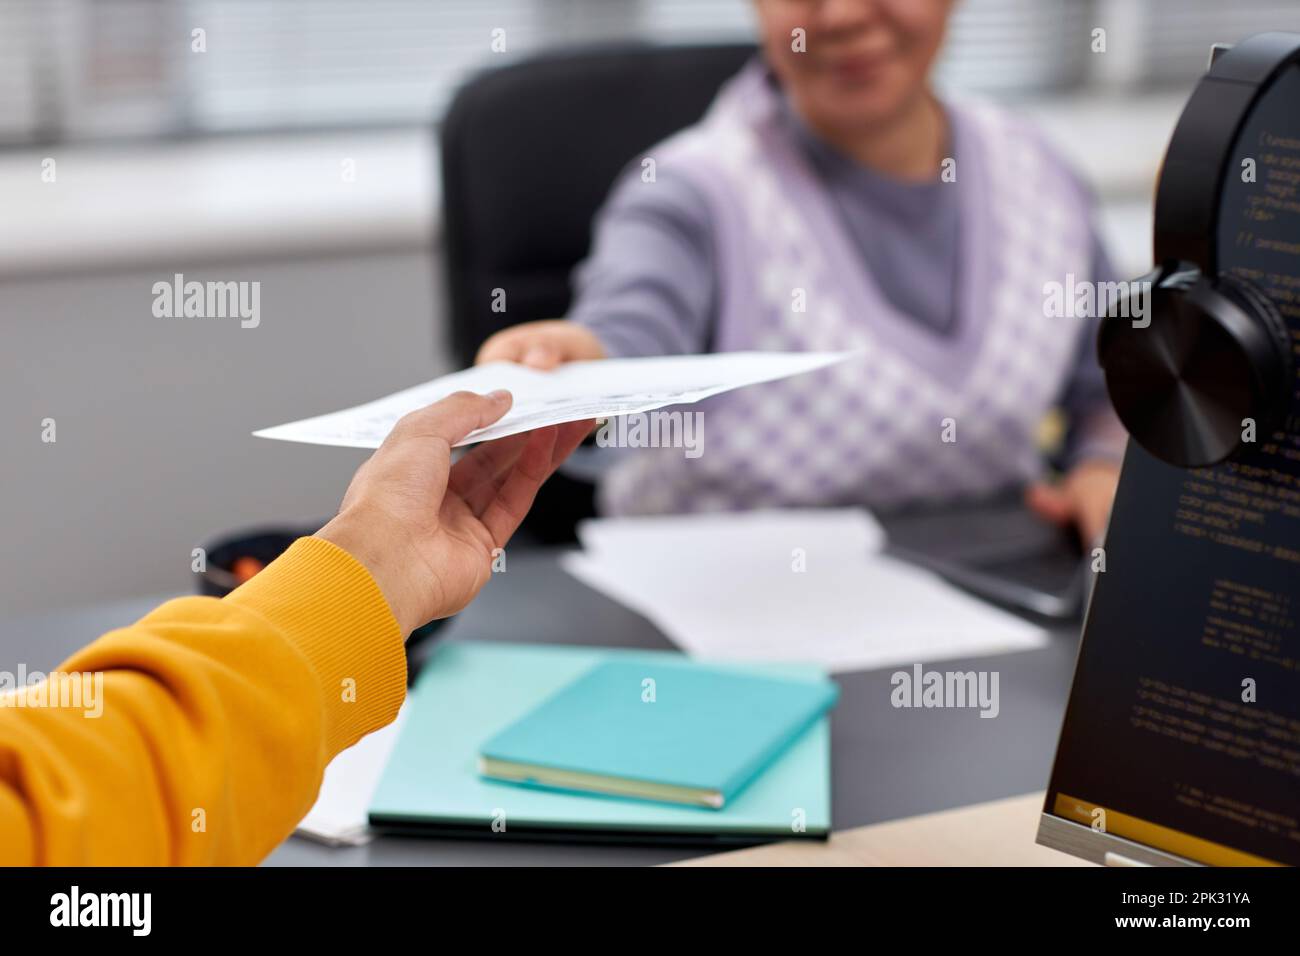 Close up of two young people handing document across table in office while collaboration on IT project, copy space Stock Photo